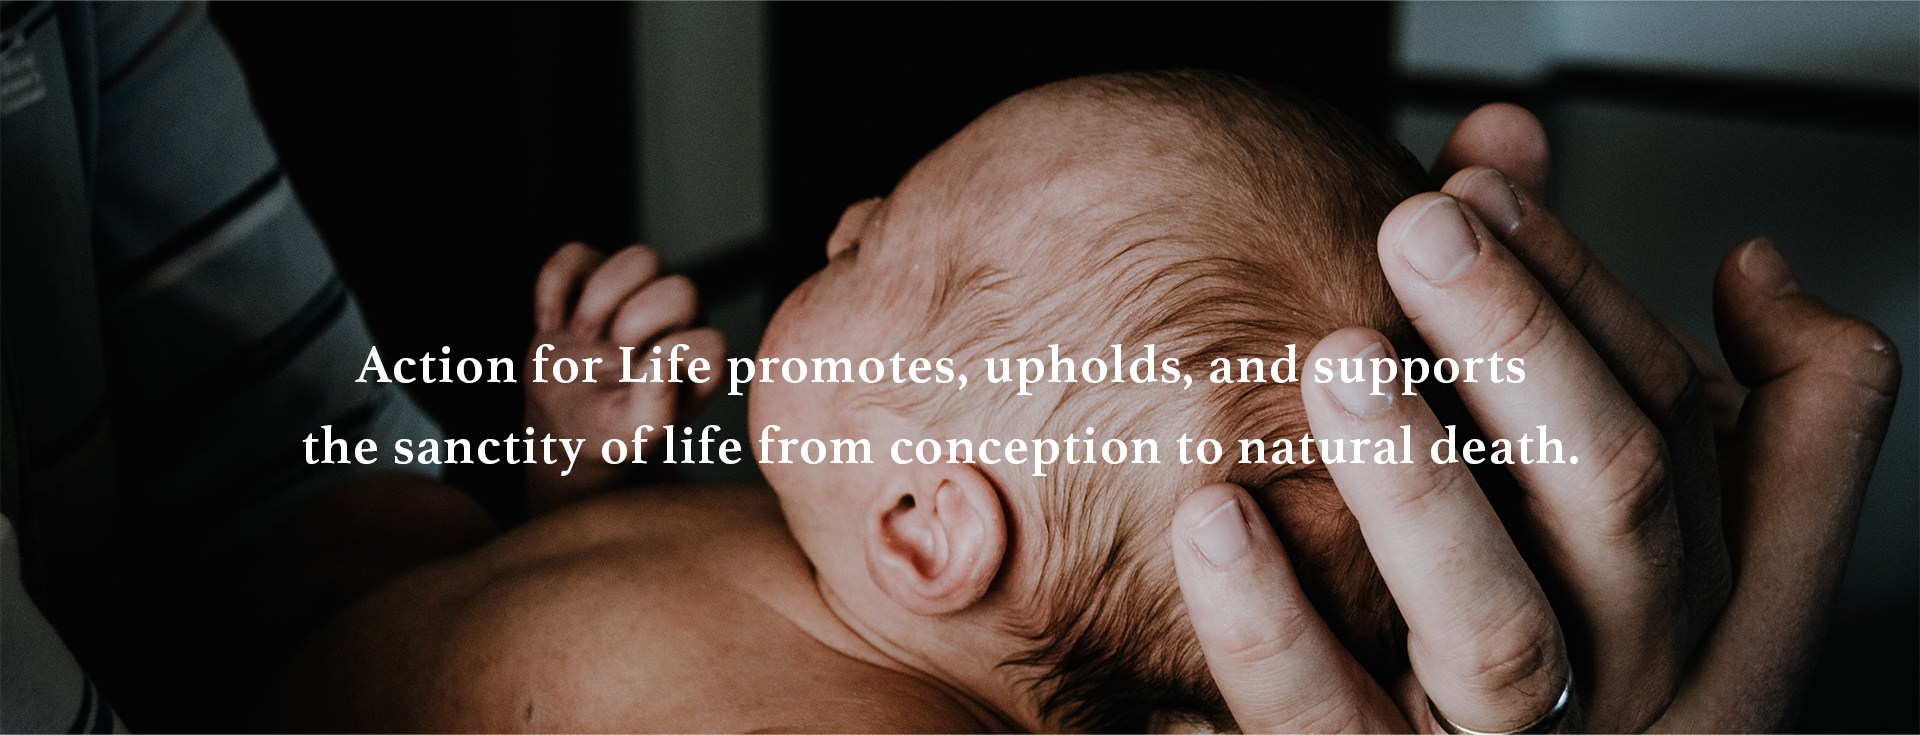 Action for Life promotes, upholds, and supports respect for human values, from conception to natural death.